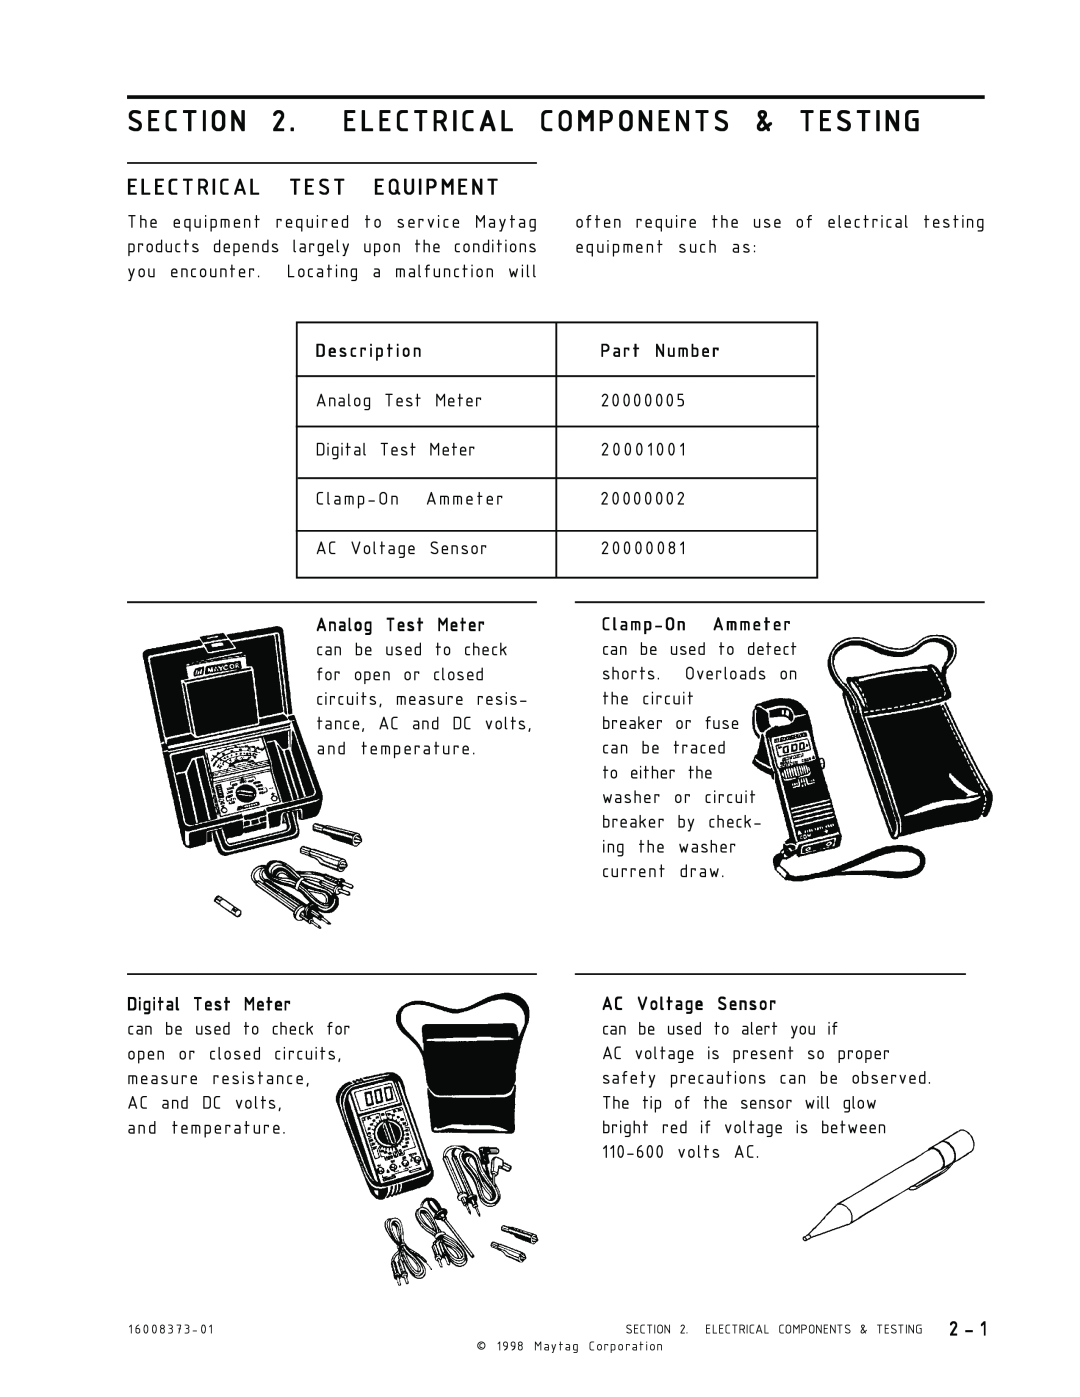 Whirlpool MAH3000 Electrical Components & Testing, Electrical Test Equipment, Description, Part Number, Analog Test Meter 